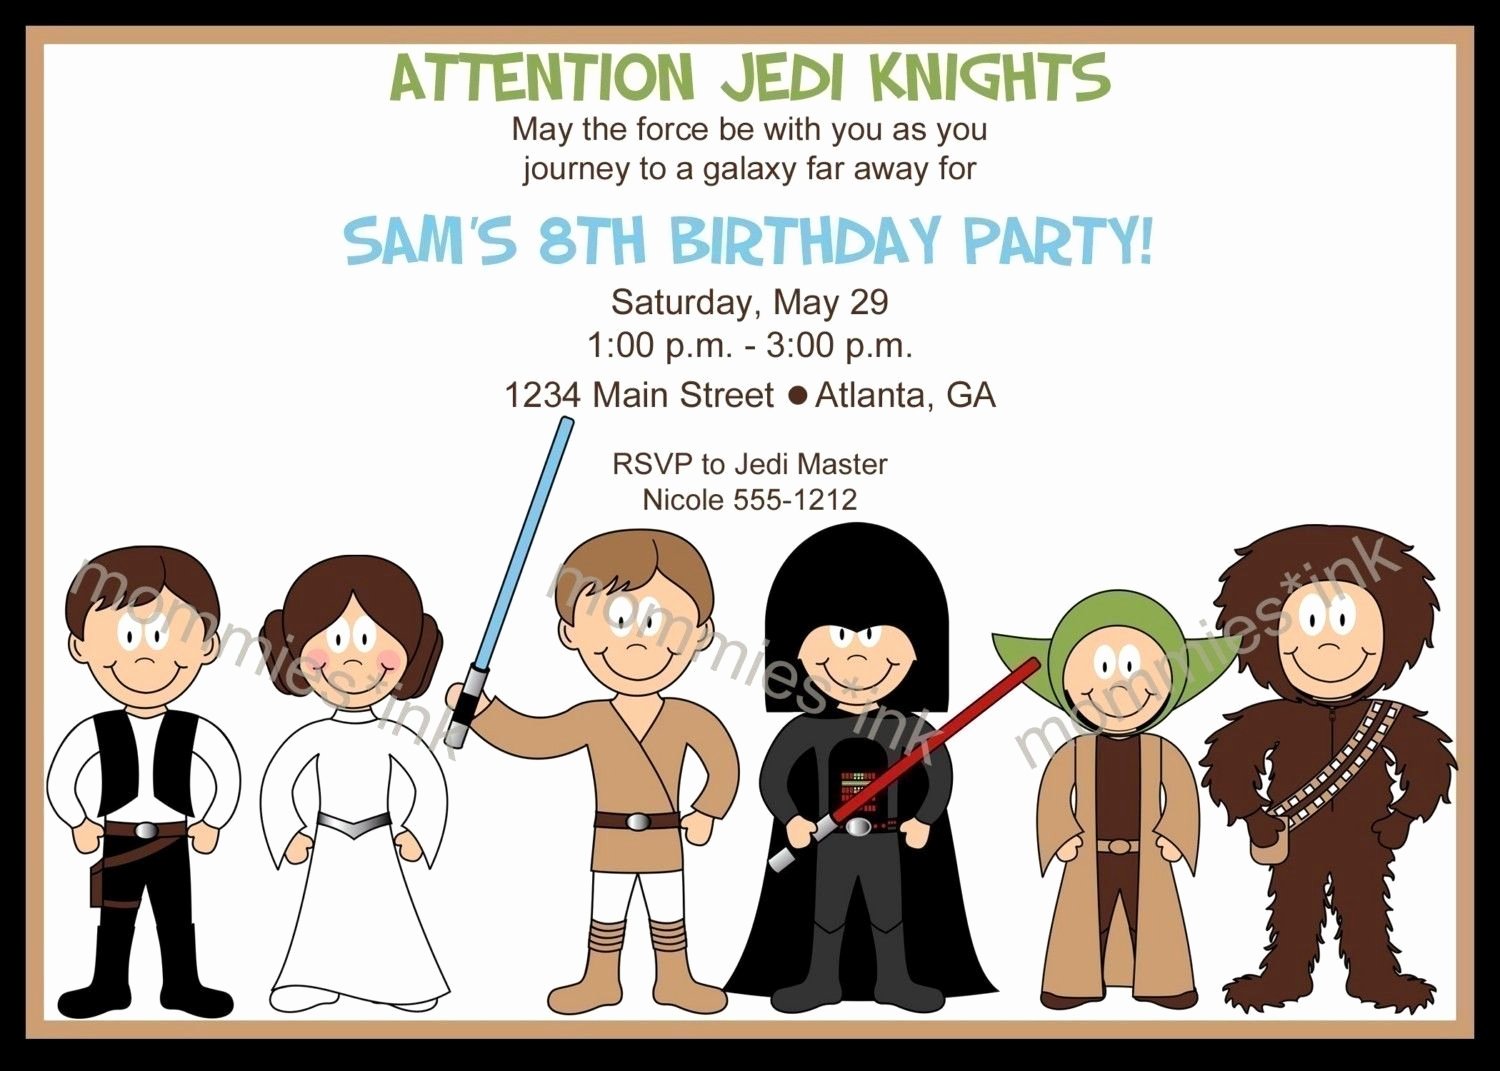 Star Wars Invitation Templates Lovely Lego Star Wars Party Invitations Printable Free Star Wars 8th B Day